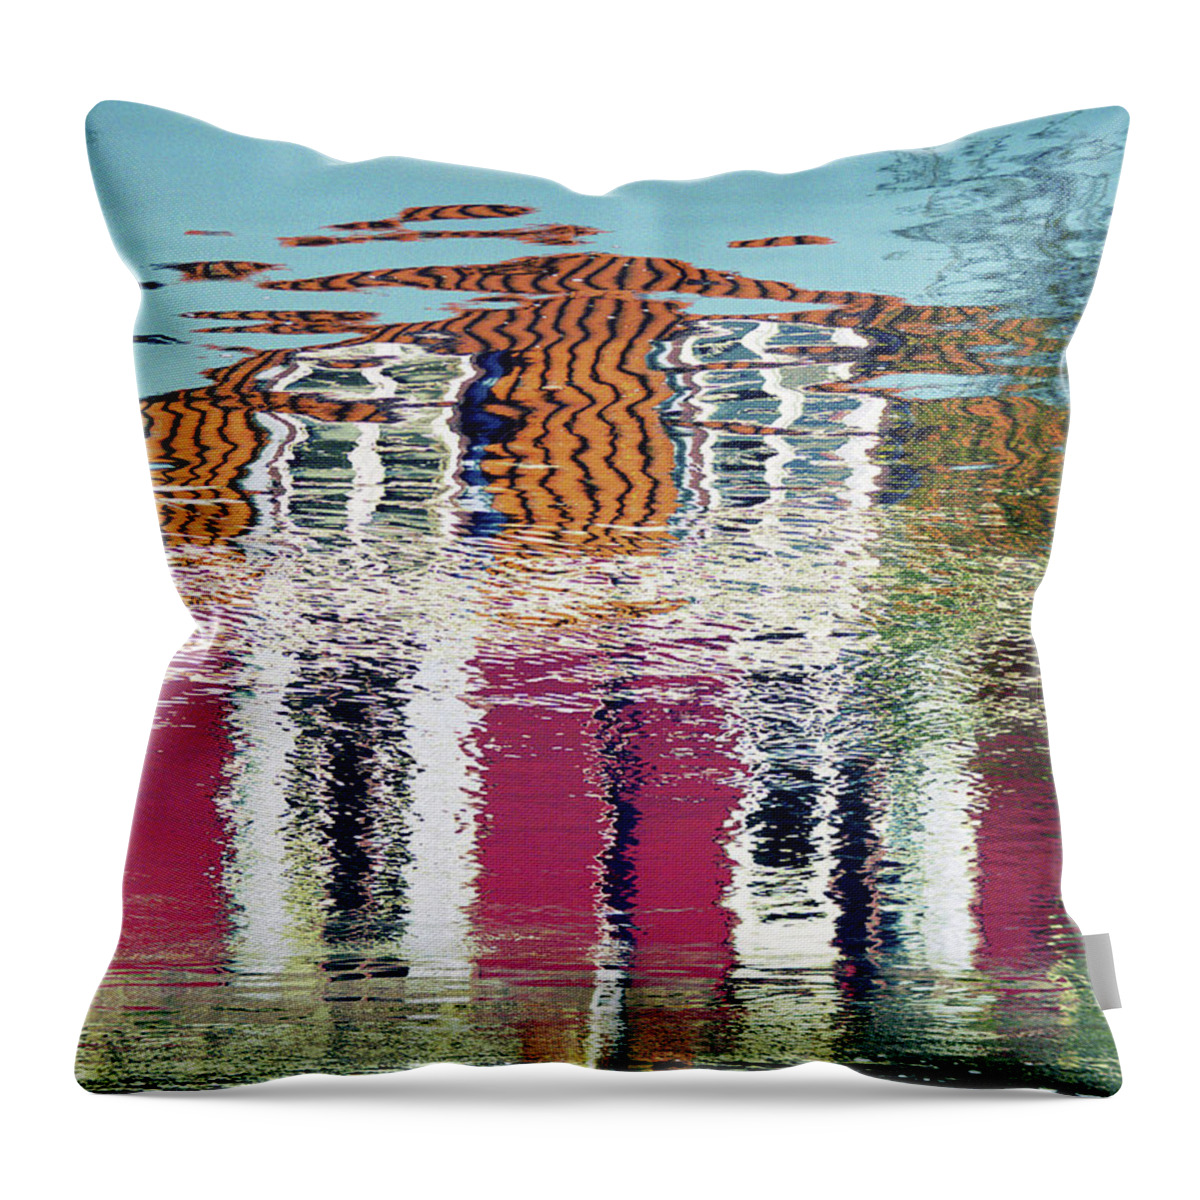 Photography Throw Pillow featuring the photograph River House by Luc Van de Steeg